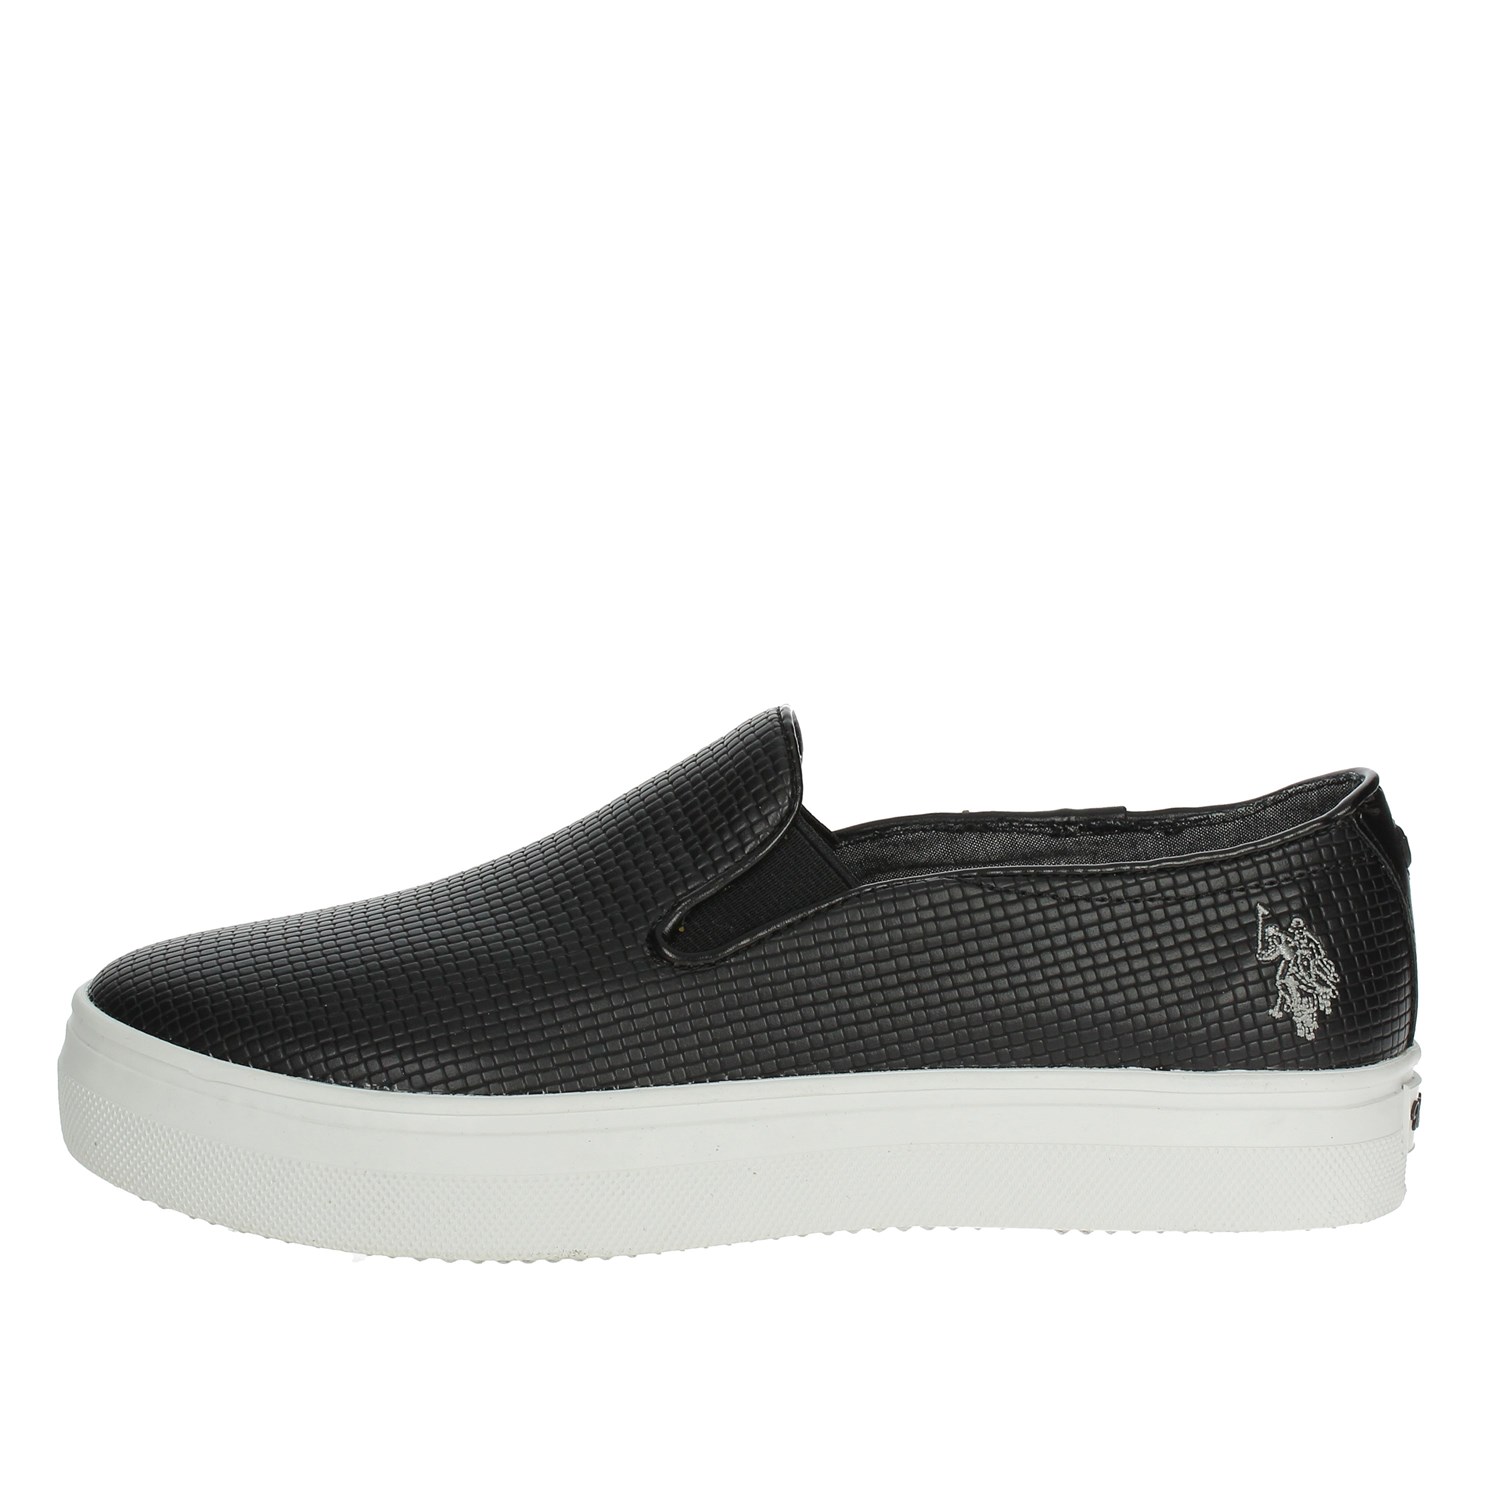 us polo slip on sneakers \u003e Up to 70 